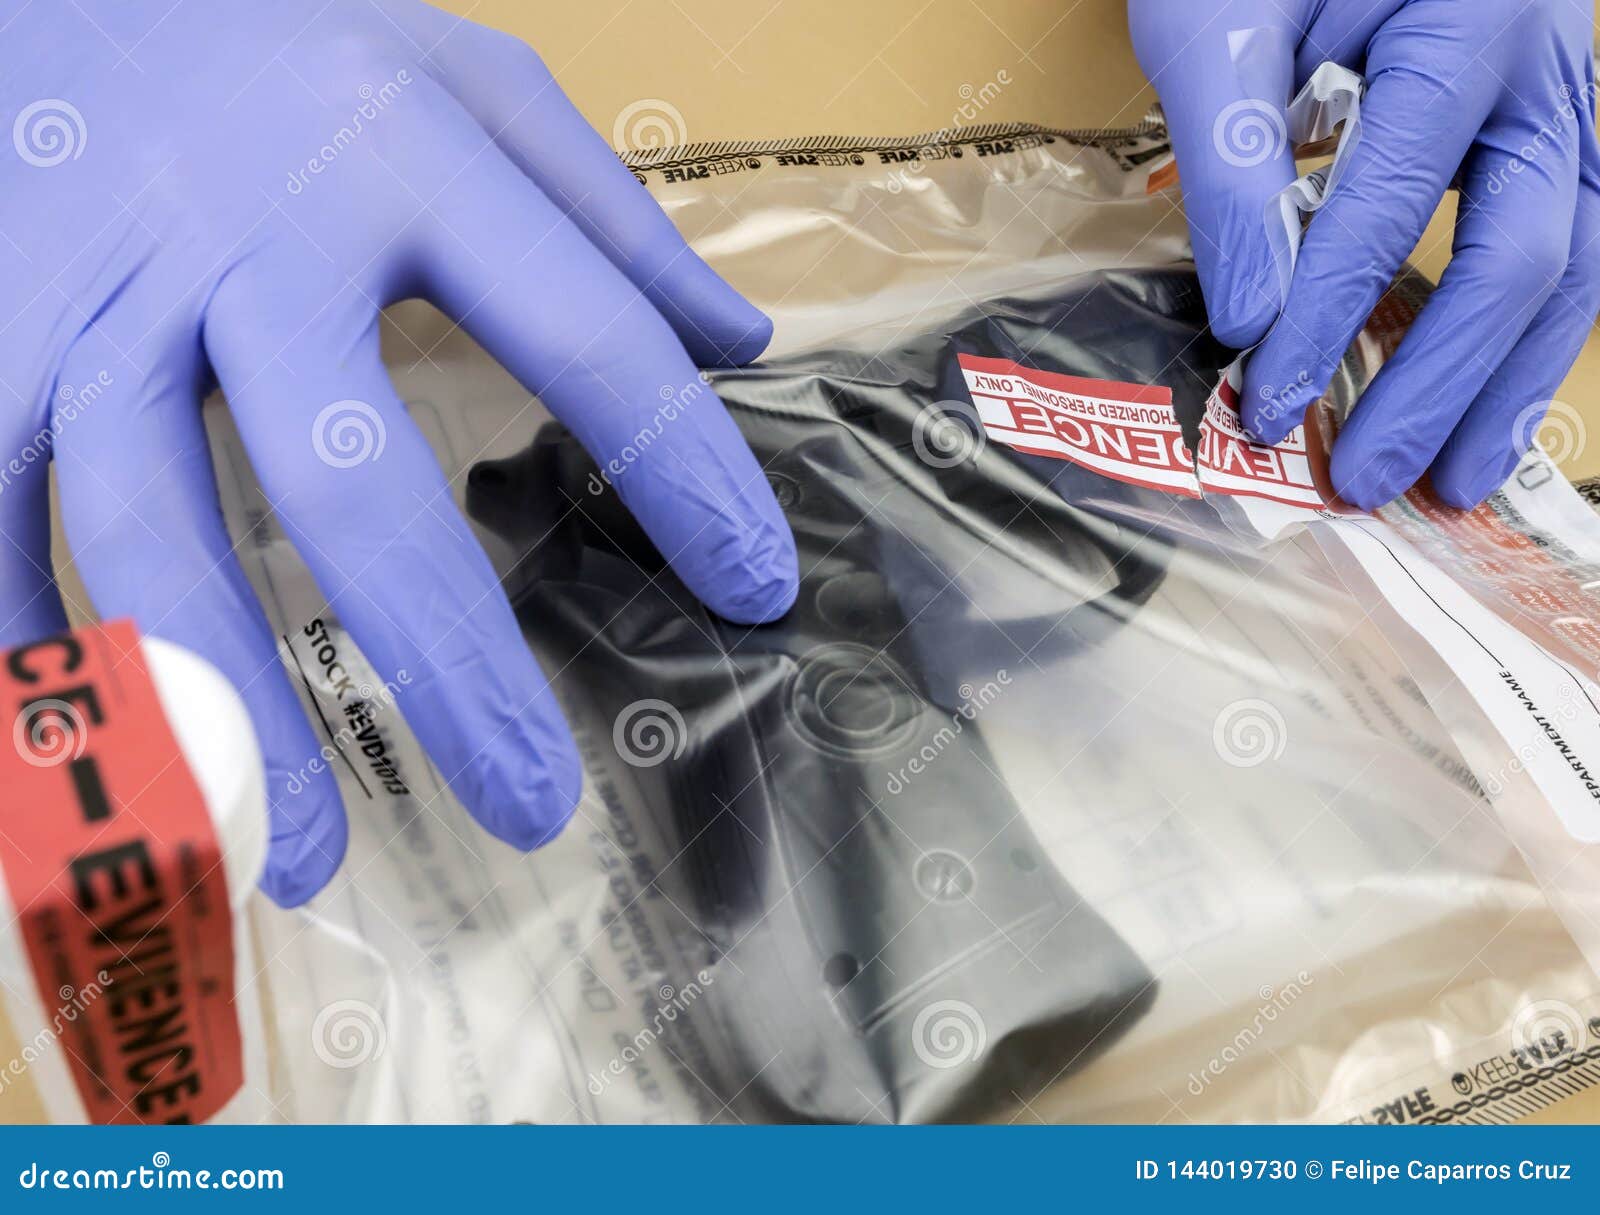 scientific police opens evidence bag with firearm in laboratorio forensic equipment